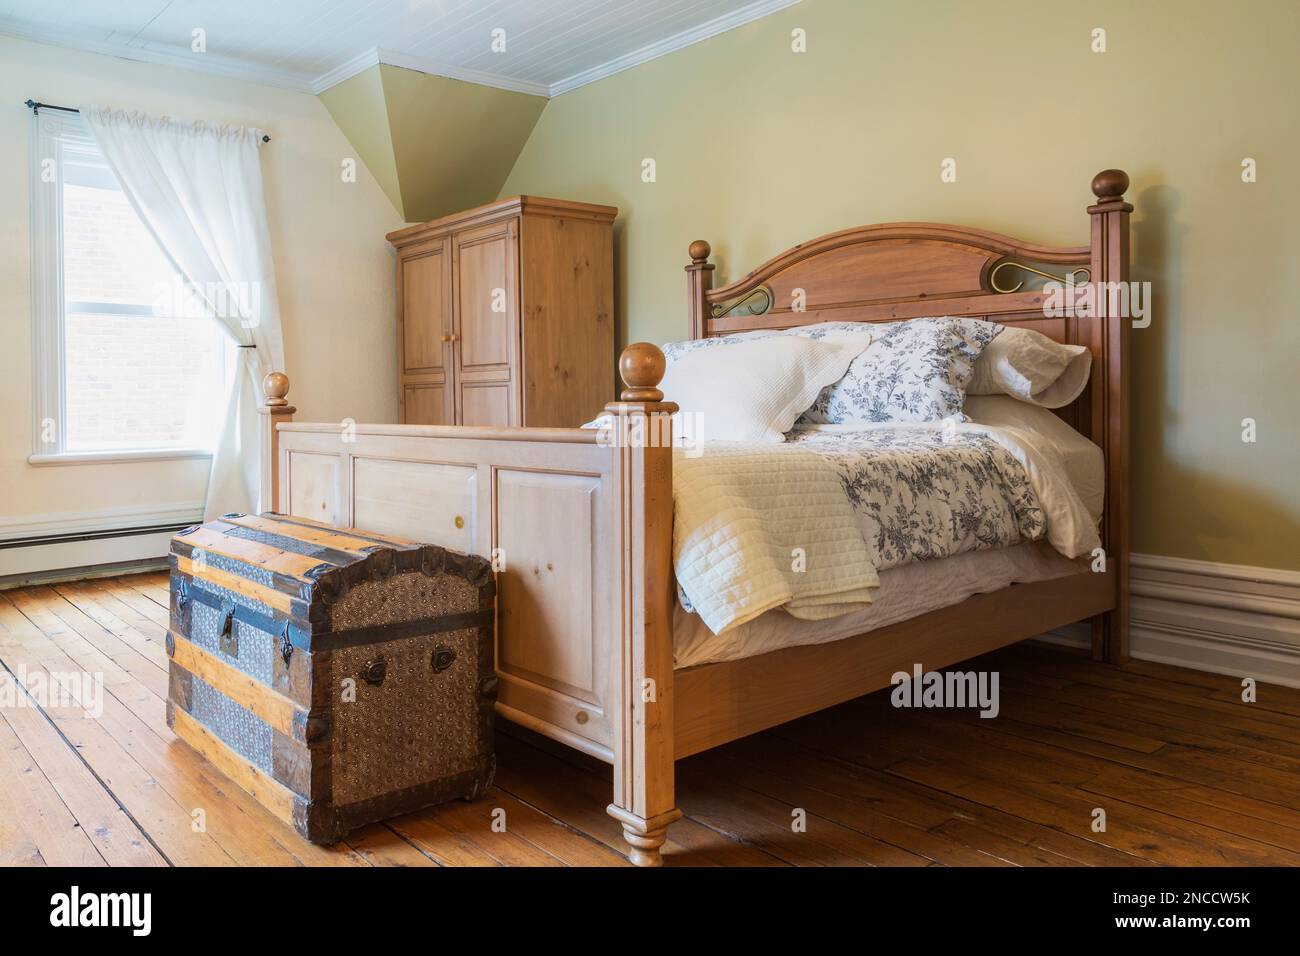 Queen size bed with wooden headboard and footboard, antique travel chest, armoire in upstairs master bedroom with oil stained fir wood floorboards. Stock Photo